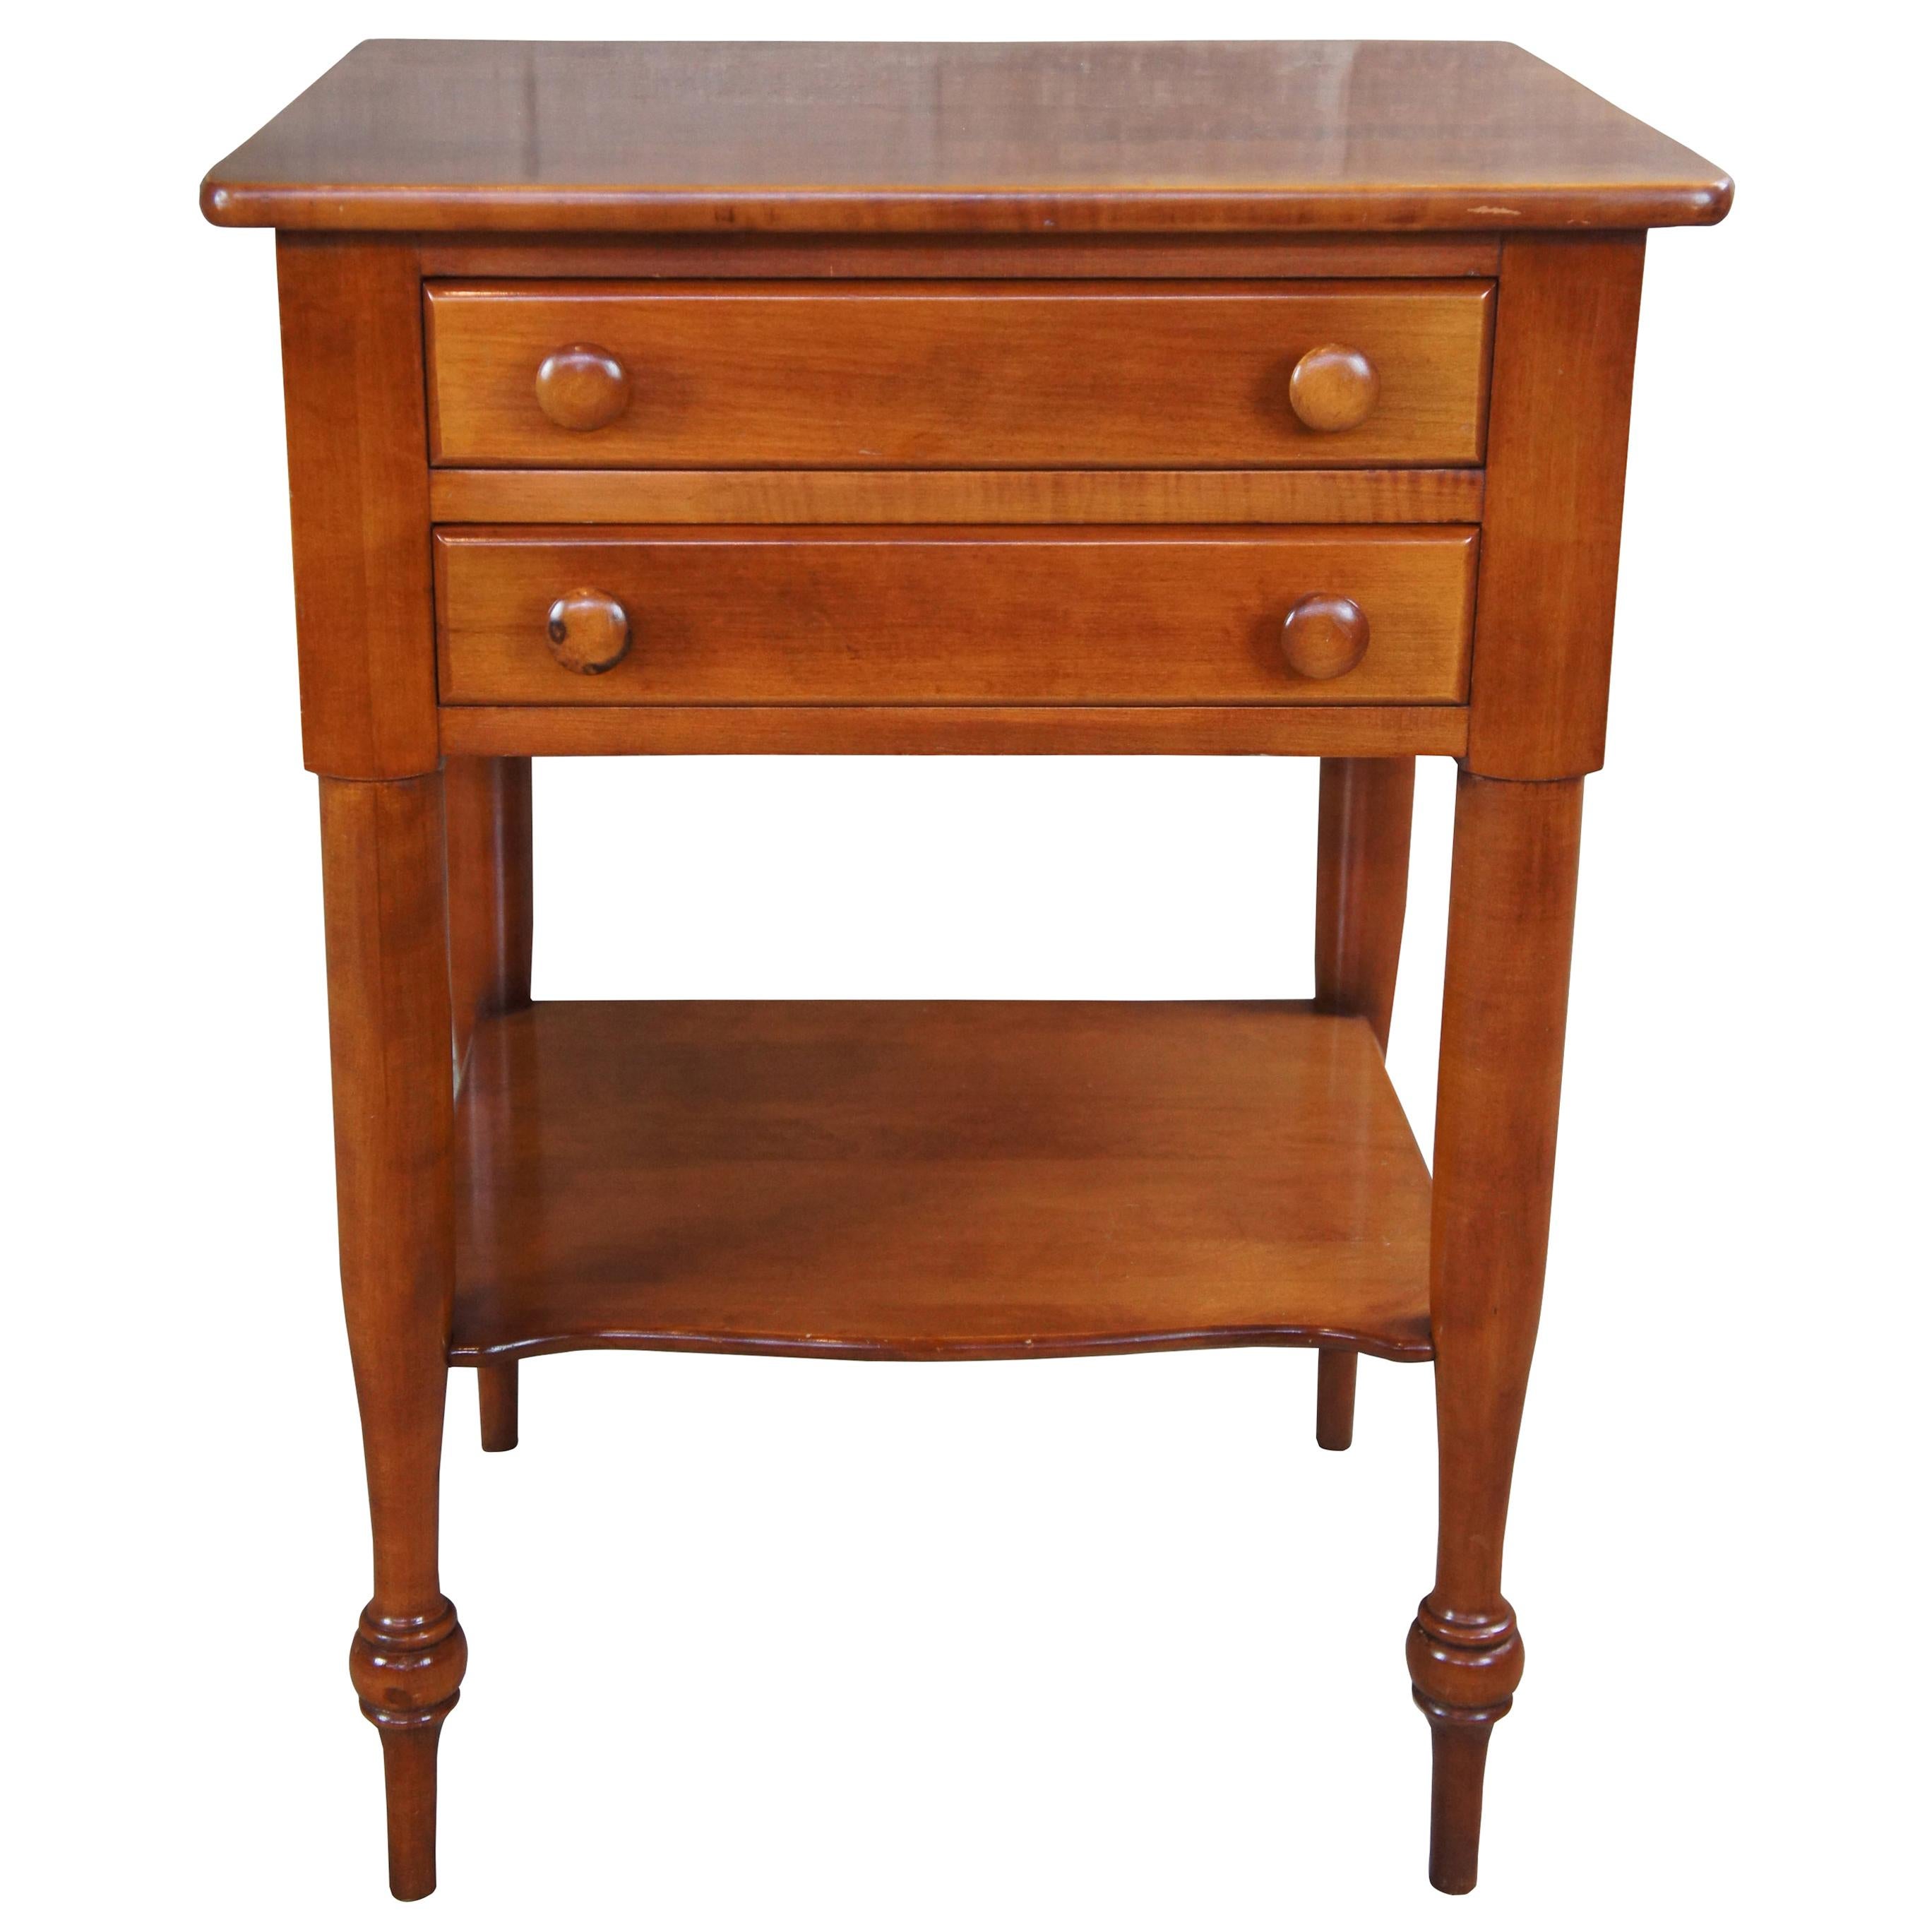 Vintage Willett Maple Nightstand 2-Drawer Early American Country Side Table